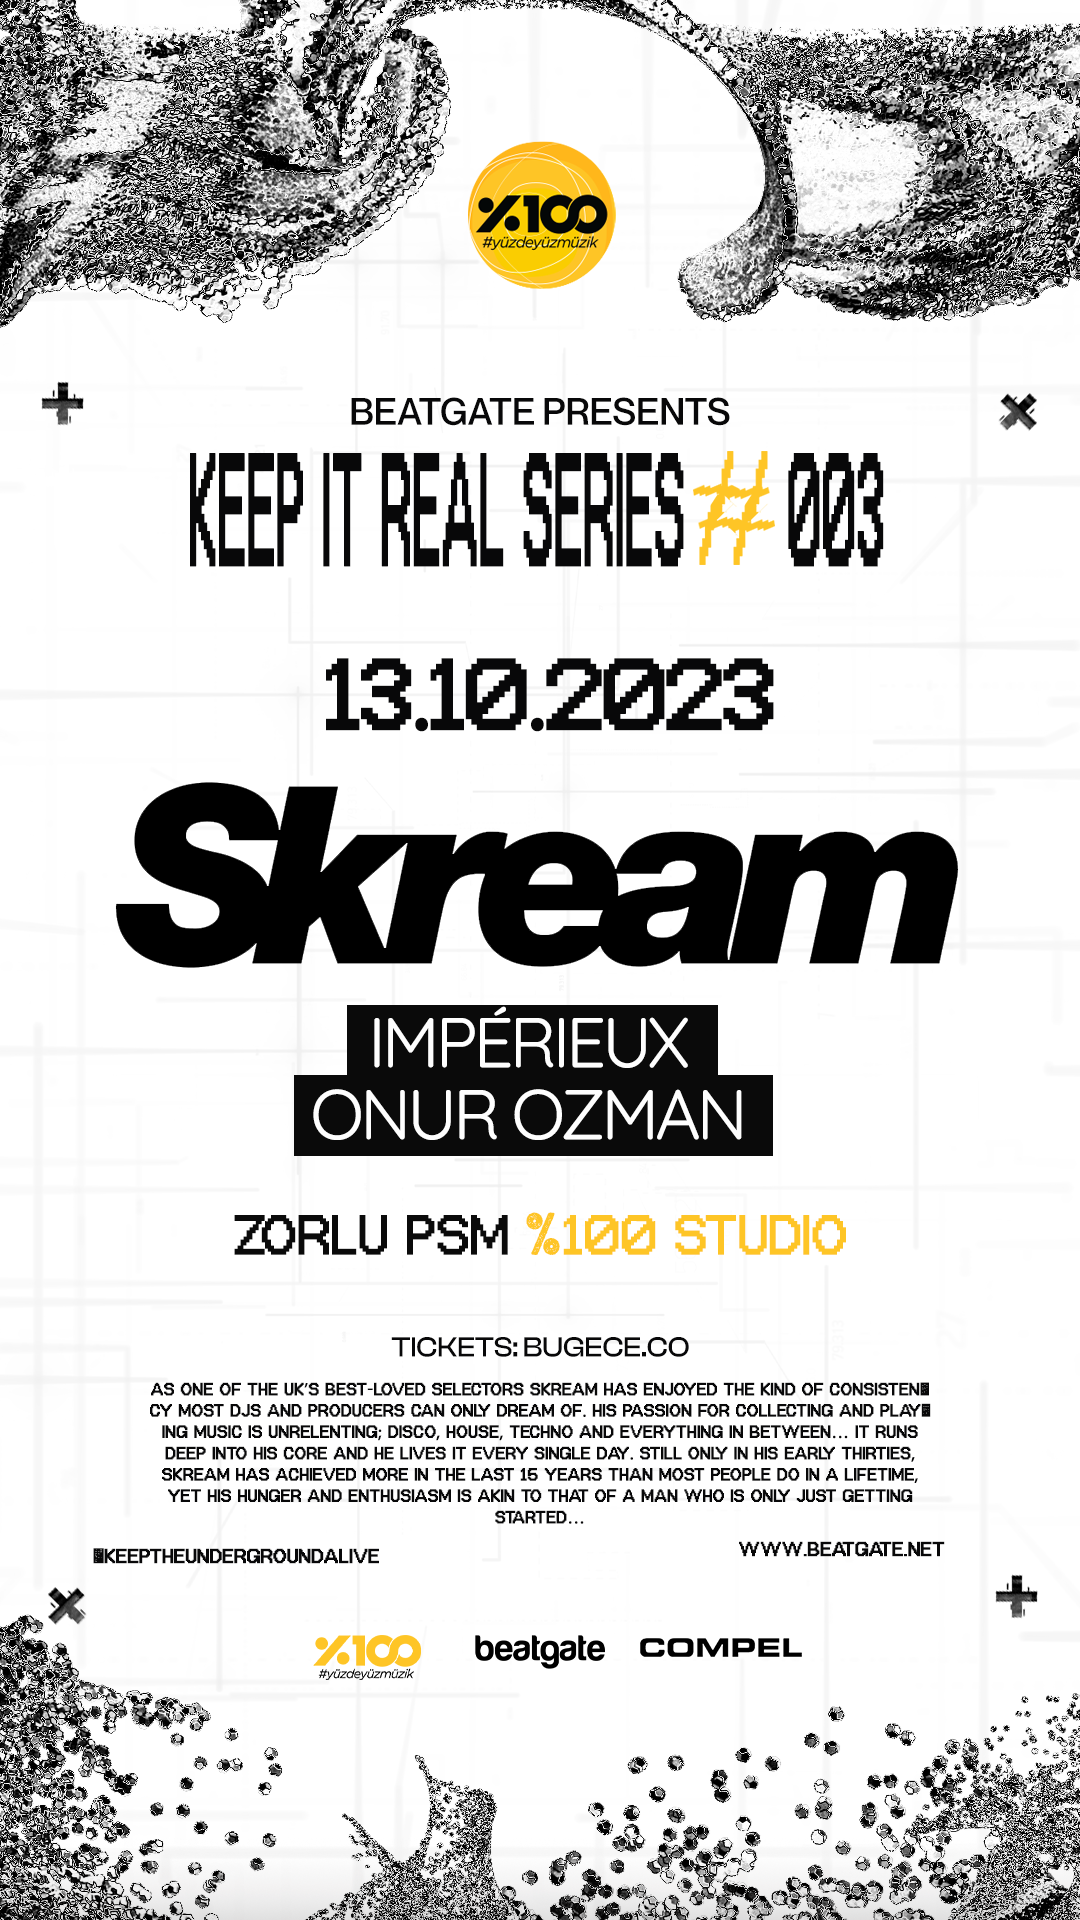 Beatgate with Skream - Keep It Real Series #003 - フライヤー裏